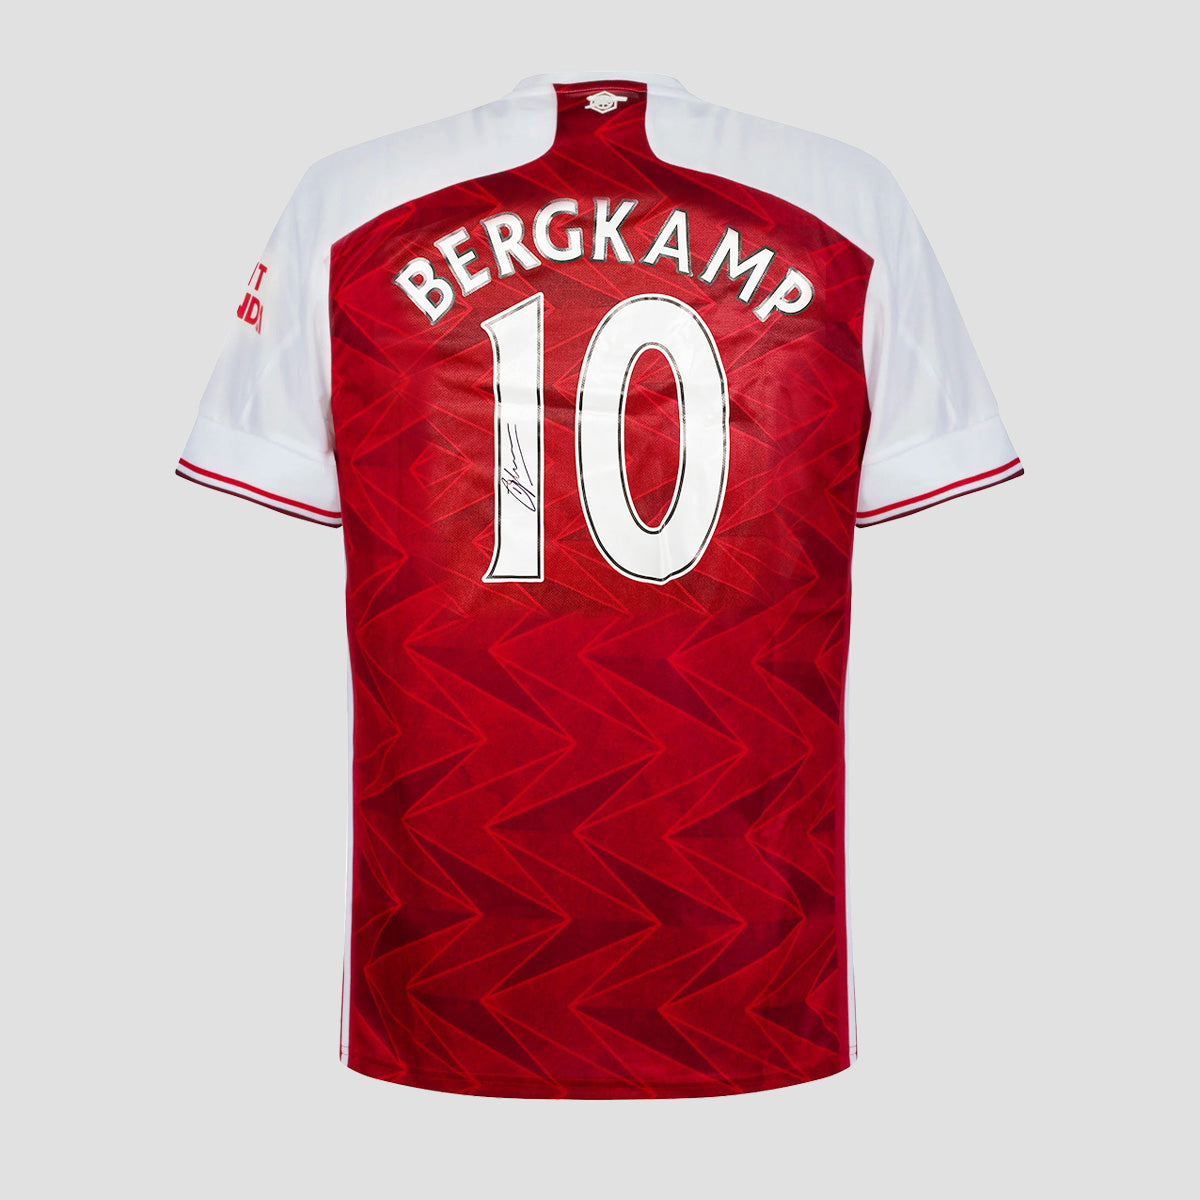 Dennis Bergkamp Back Signed 20-21 Arsenal Home Shirt (Boxed) - The Bootroom Collection